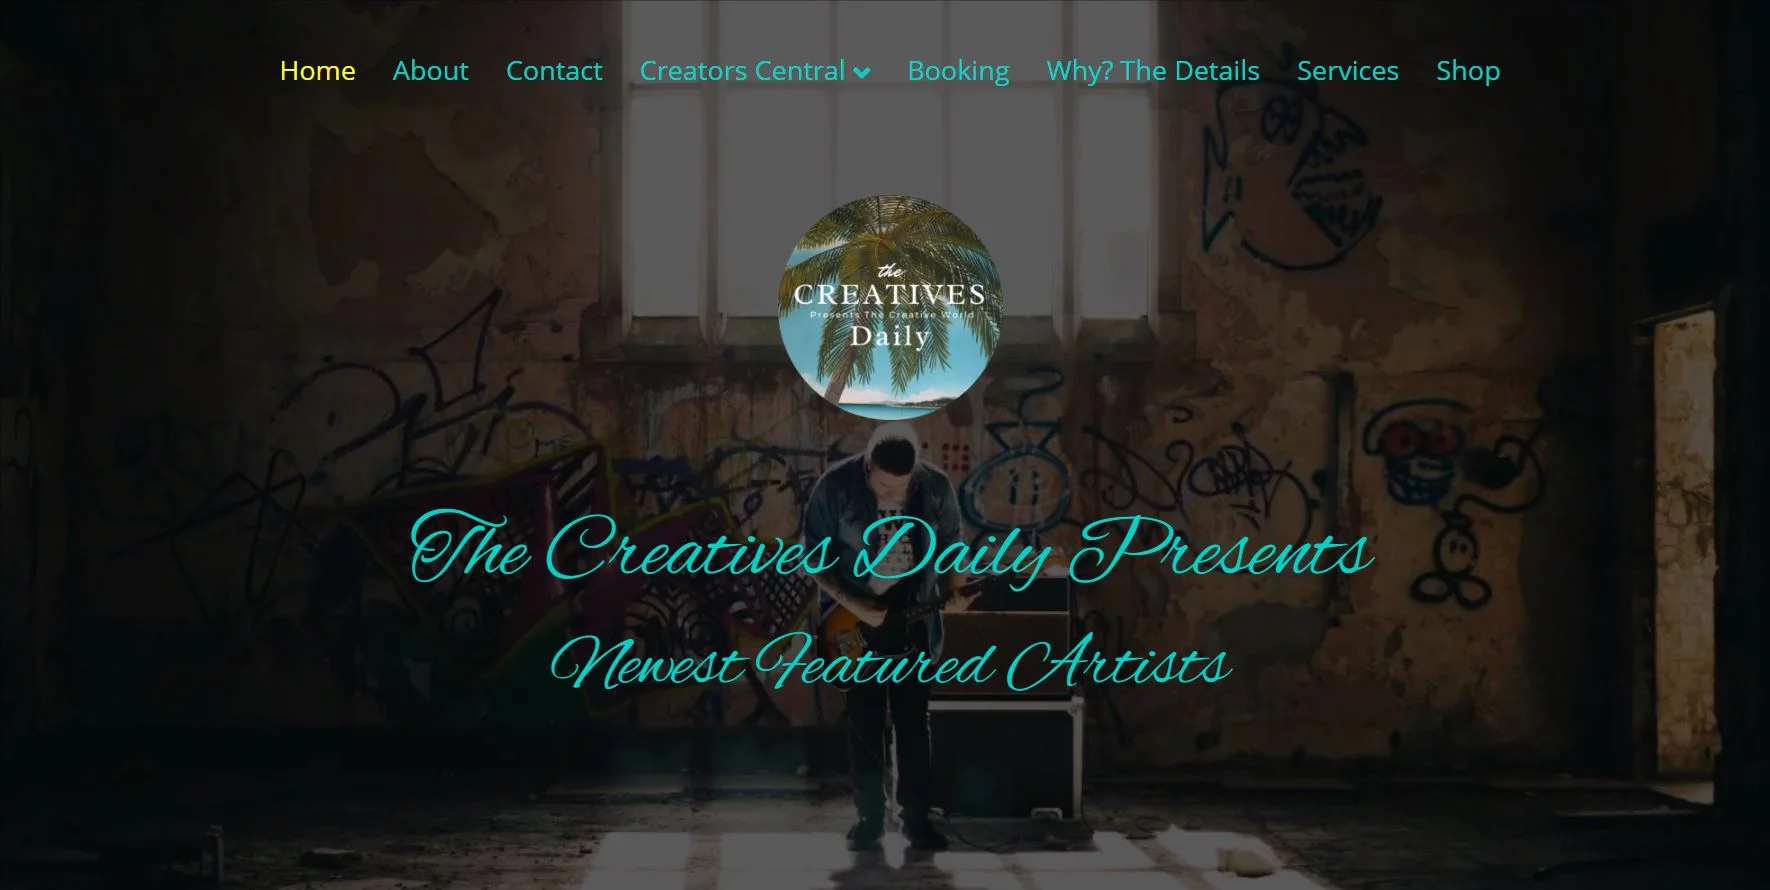 The Creatives Daily Presents web design by Artistic Creative Websites Naples Fl